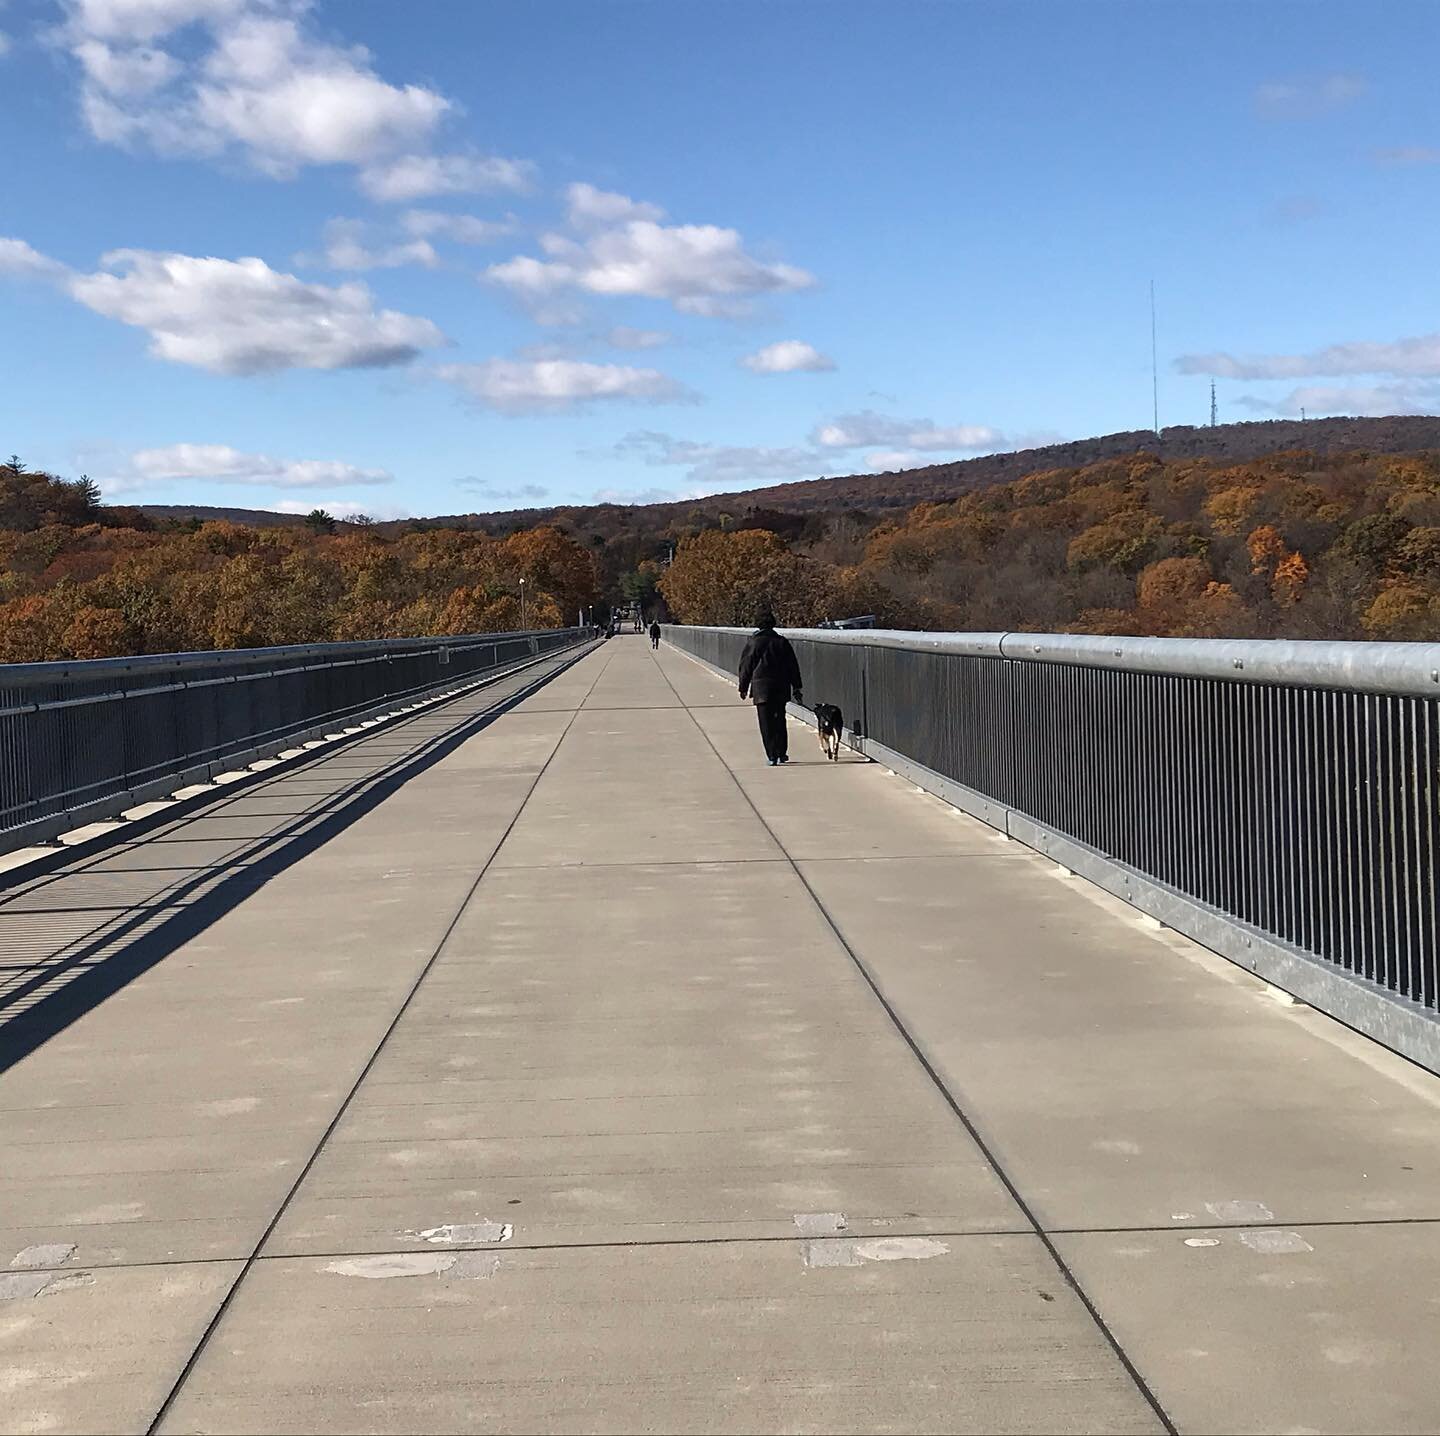 Walkway Over the Hudson

Opening in 2009, Walkway Over the Hudson was the result of transforming the old Poughkeepsie-Hudson Railroad Bridge into a pedestrian and bicycle trail. Two hundred and twelve feet above the Hudson and 1.28 miles across, the 